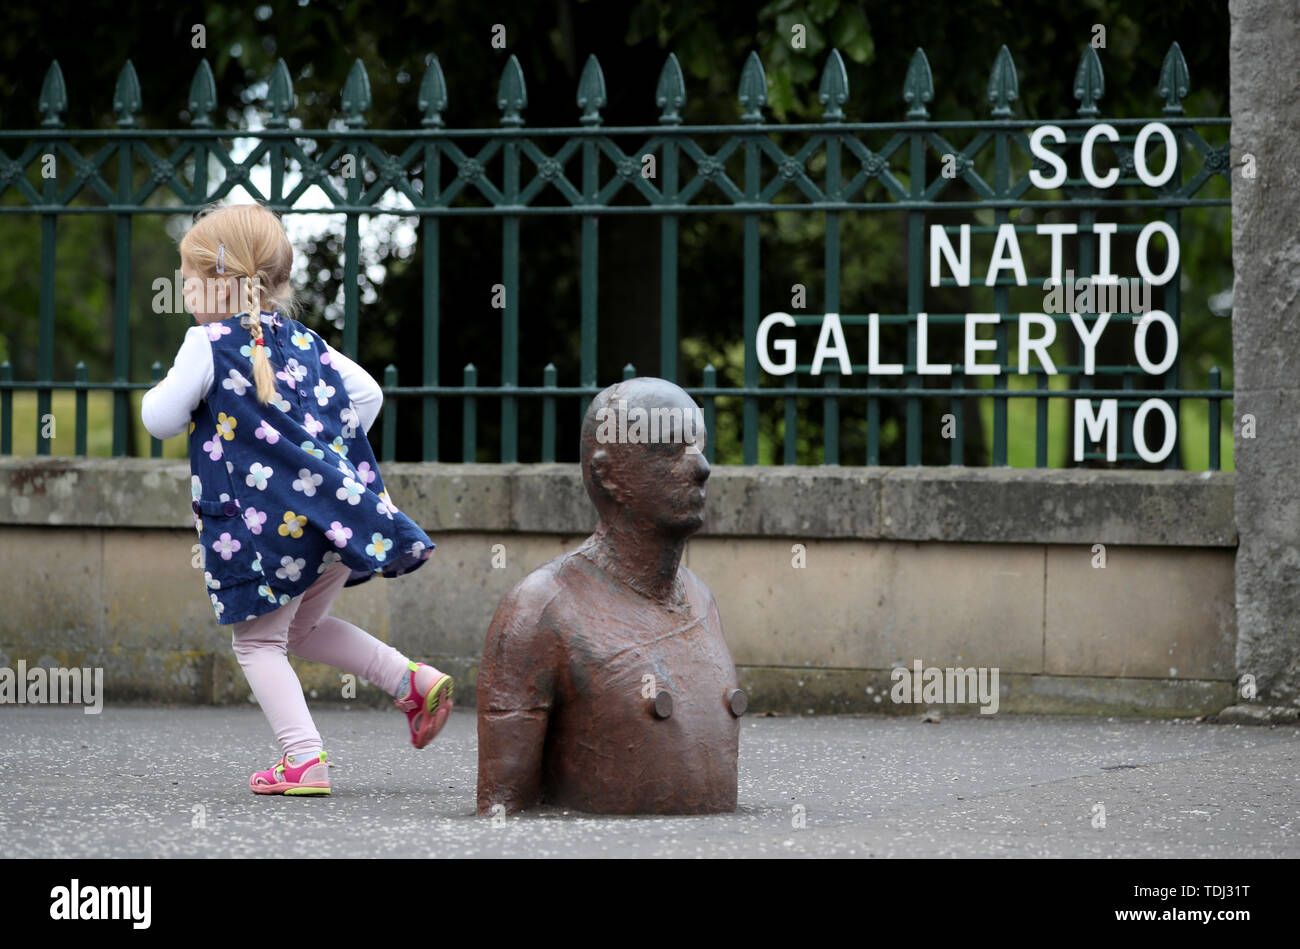 Phoebo Chisholm, 3, runs past 'Goma Man' one of six life-size iron figures by artist Antony Gormley that forms part of the installation '6 Times' which marks out a watery route along Edinburgh's Water of Leith from the Scottish National Gallery of Modern Art to the sea at Leith Docks. Stock Photo